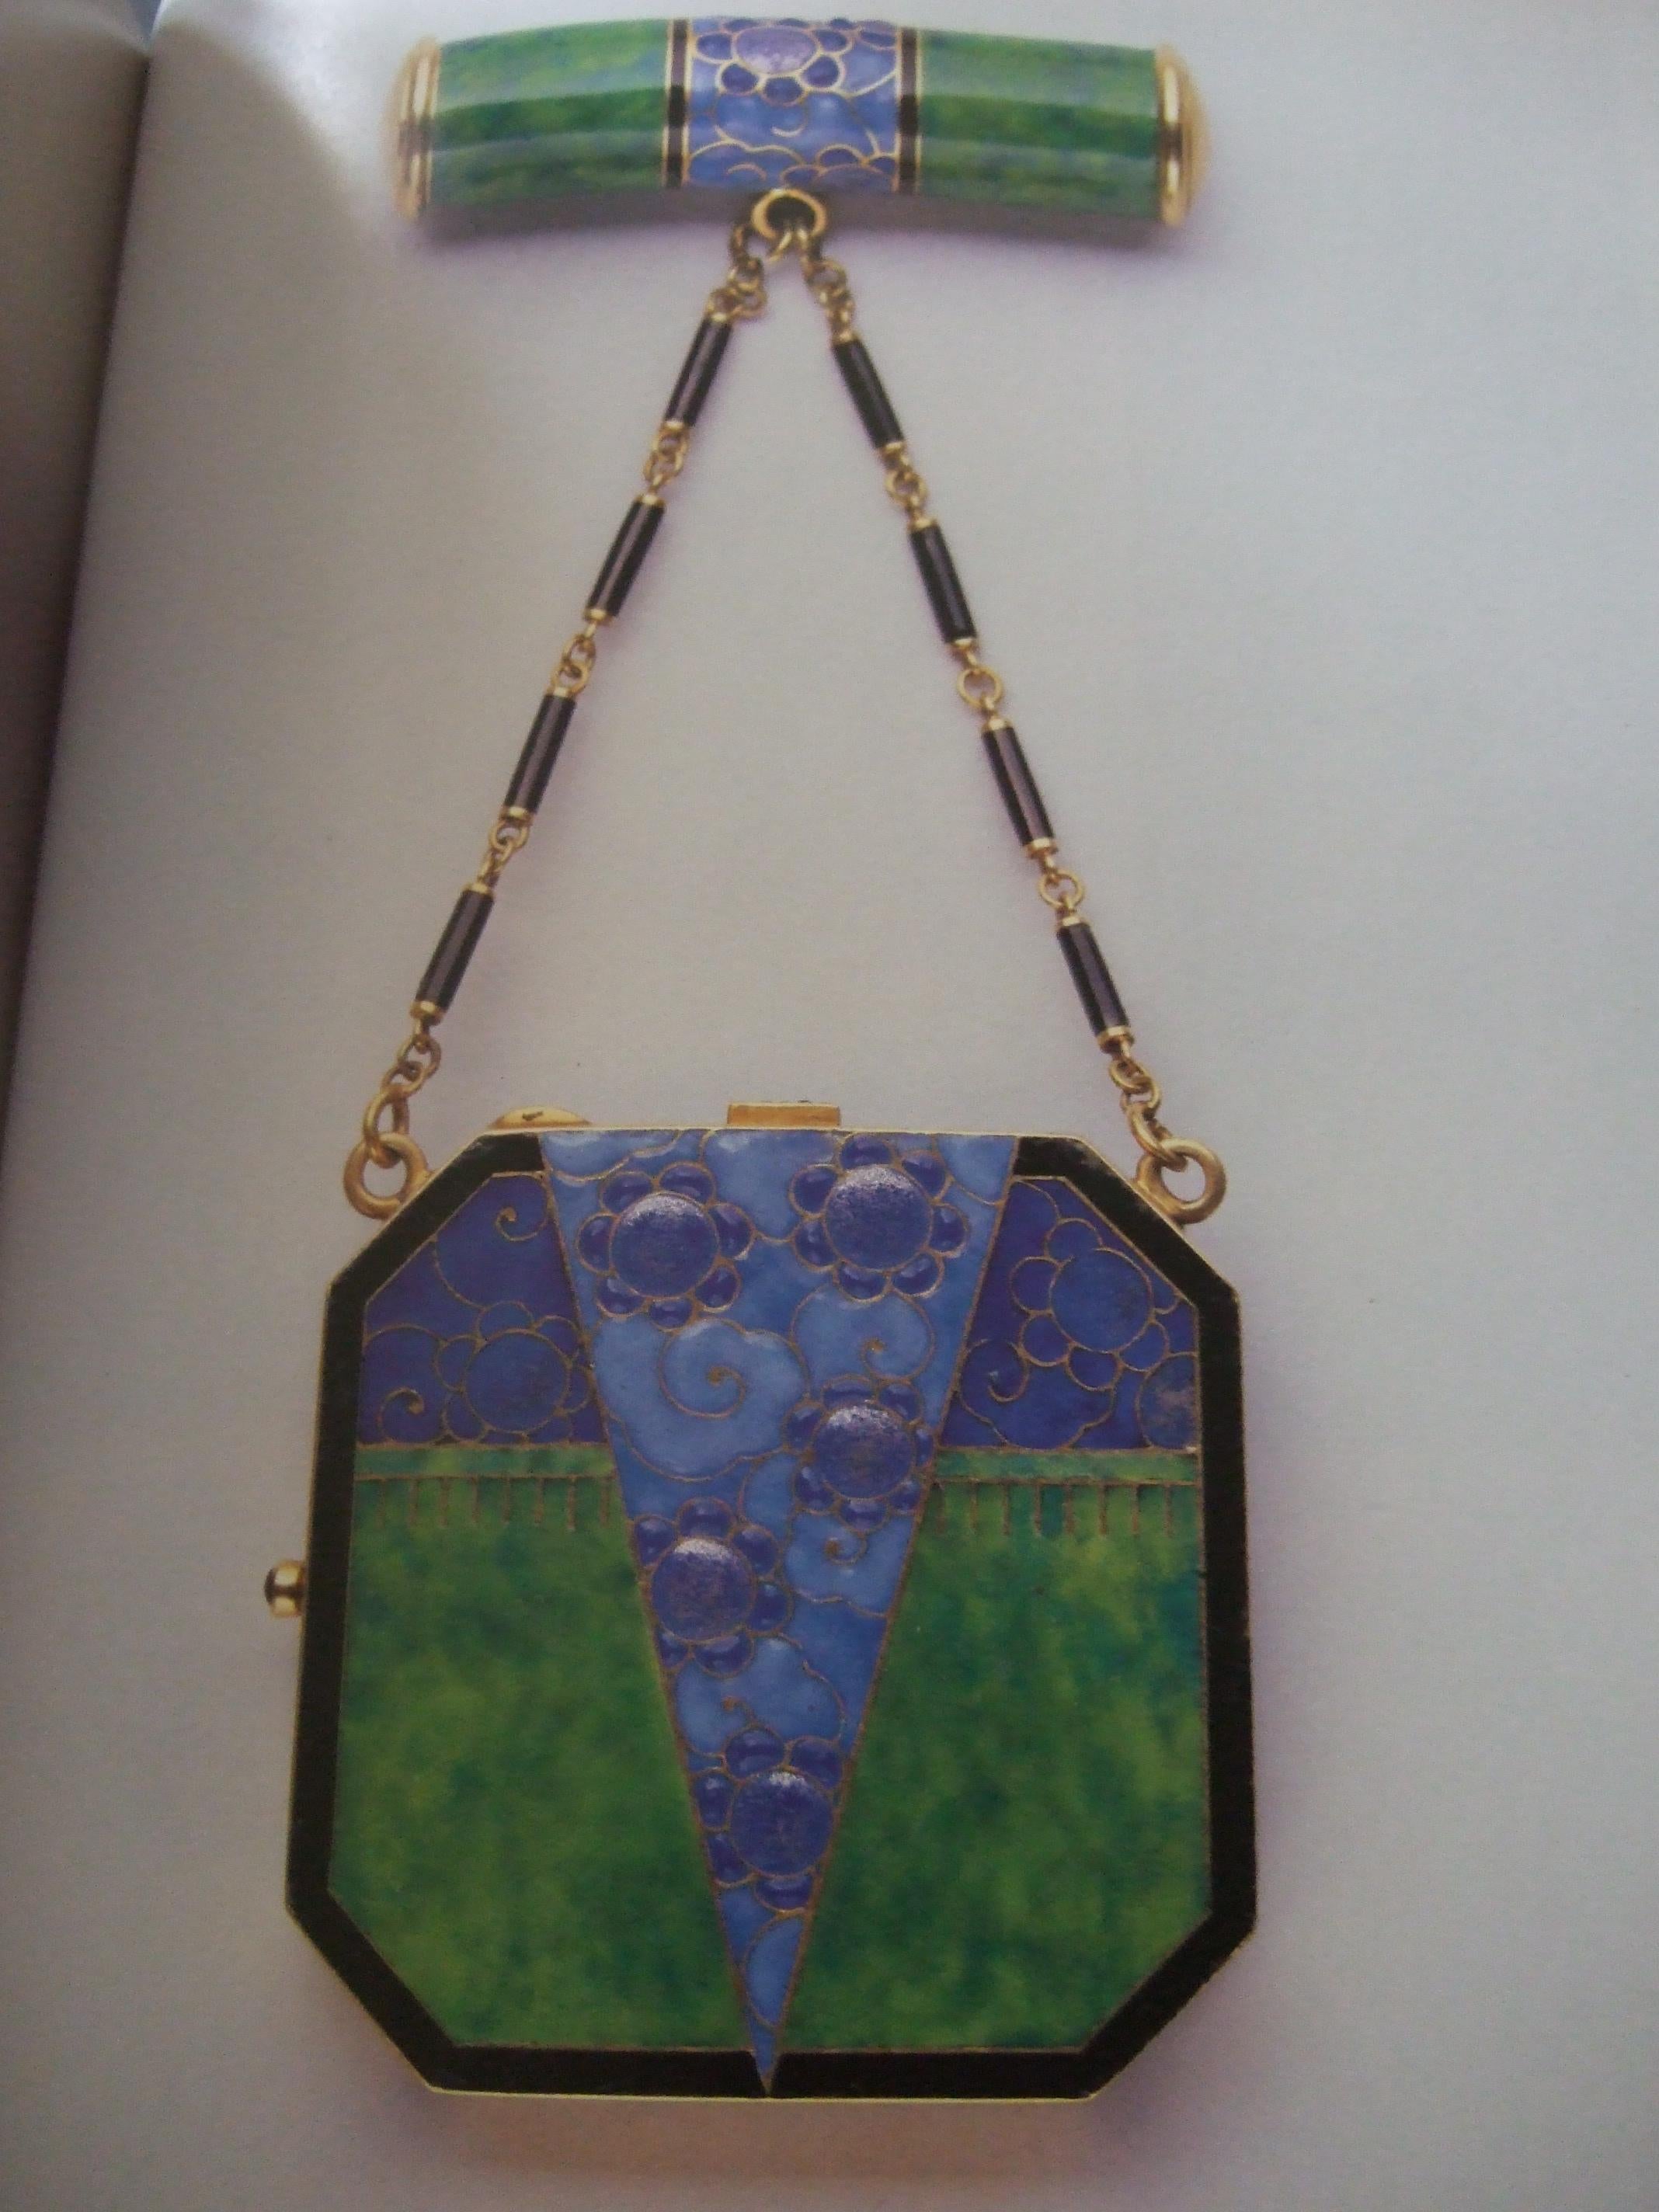 Rare Hard Cover Art Deco Jewelry Book from Rizzoli by Sylvie Raulet c 1984  For Sale 9